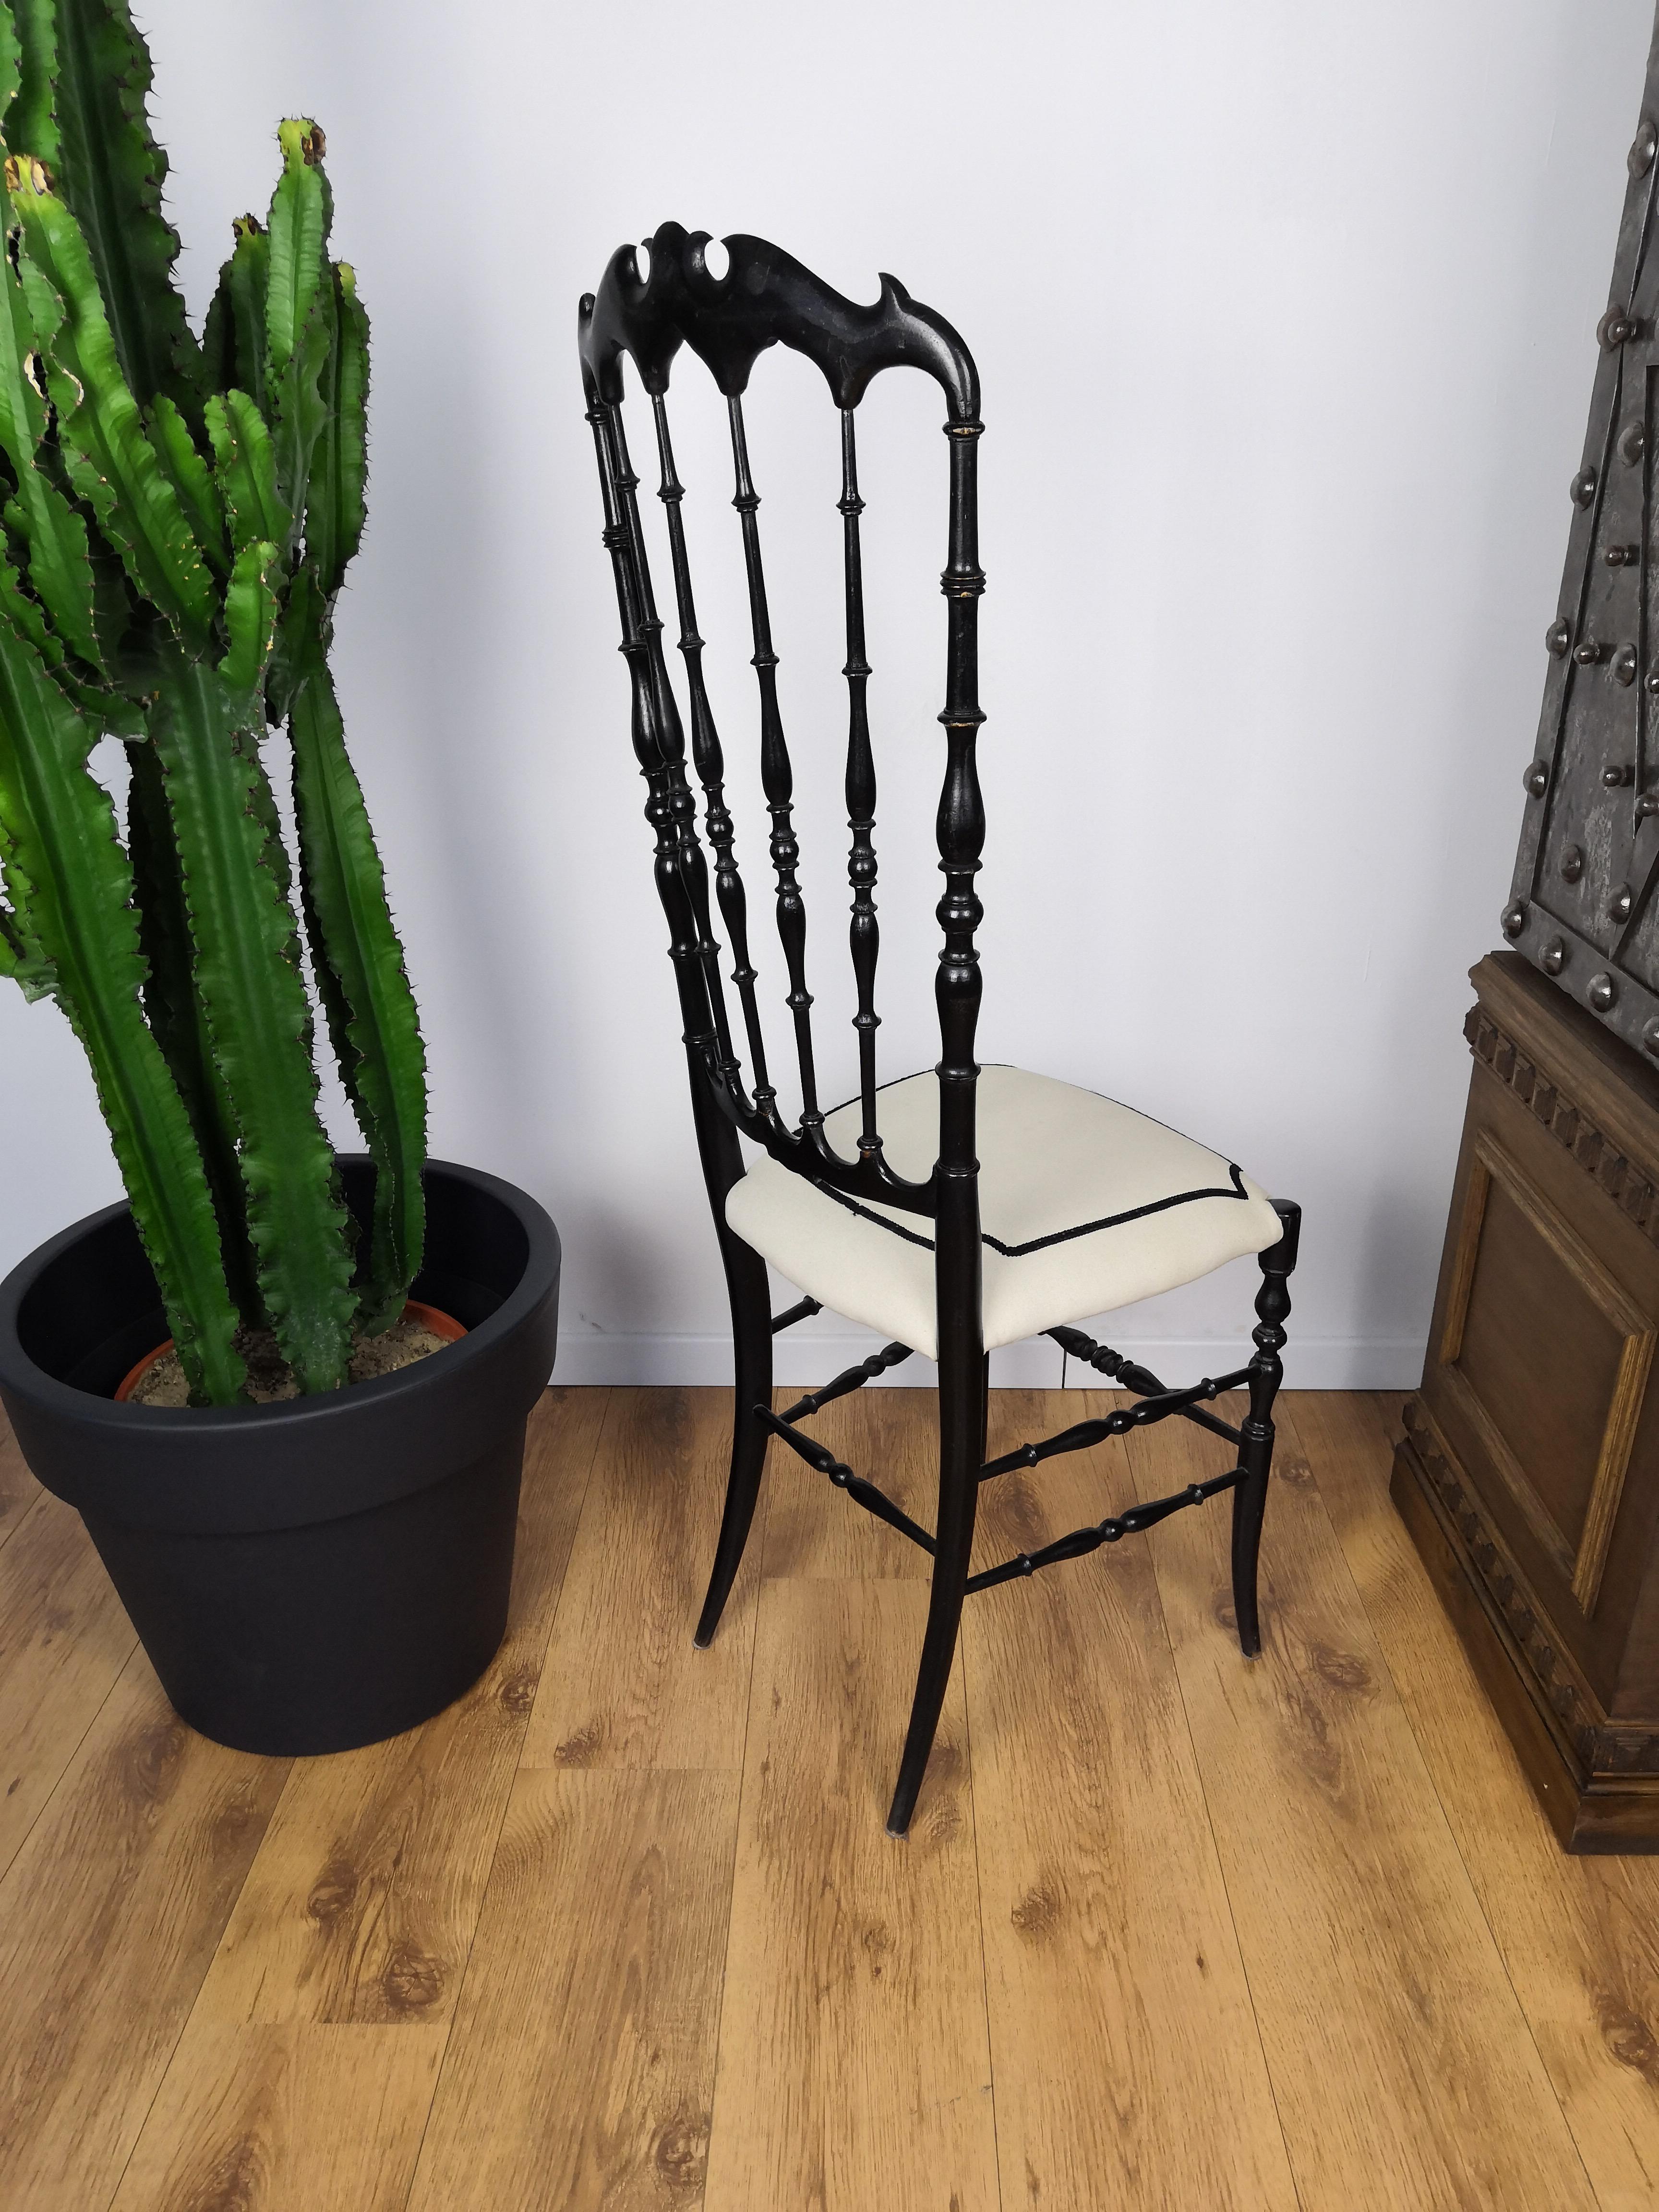 Hollywood Regency 1970s Italian Carved Wood Black Chiavari Chair in Contemporary Modern Upholstery